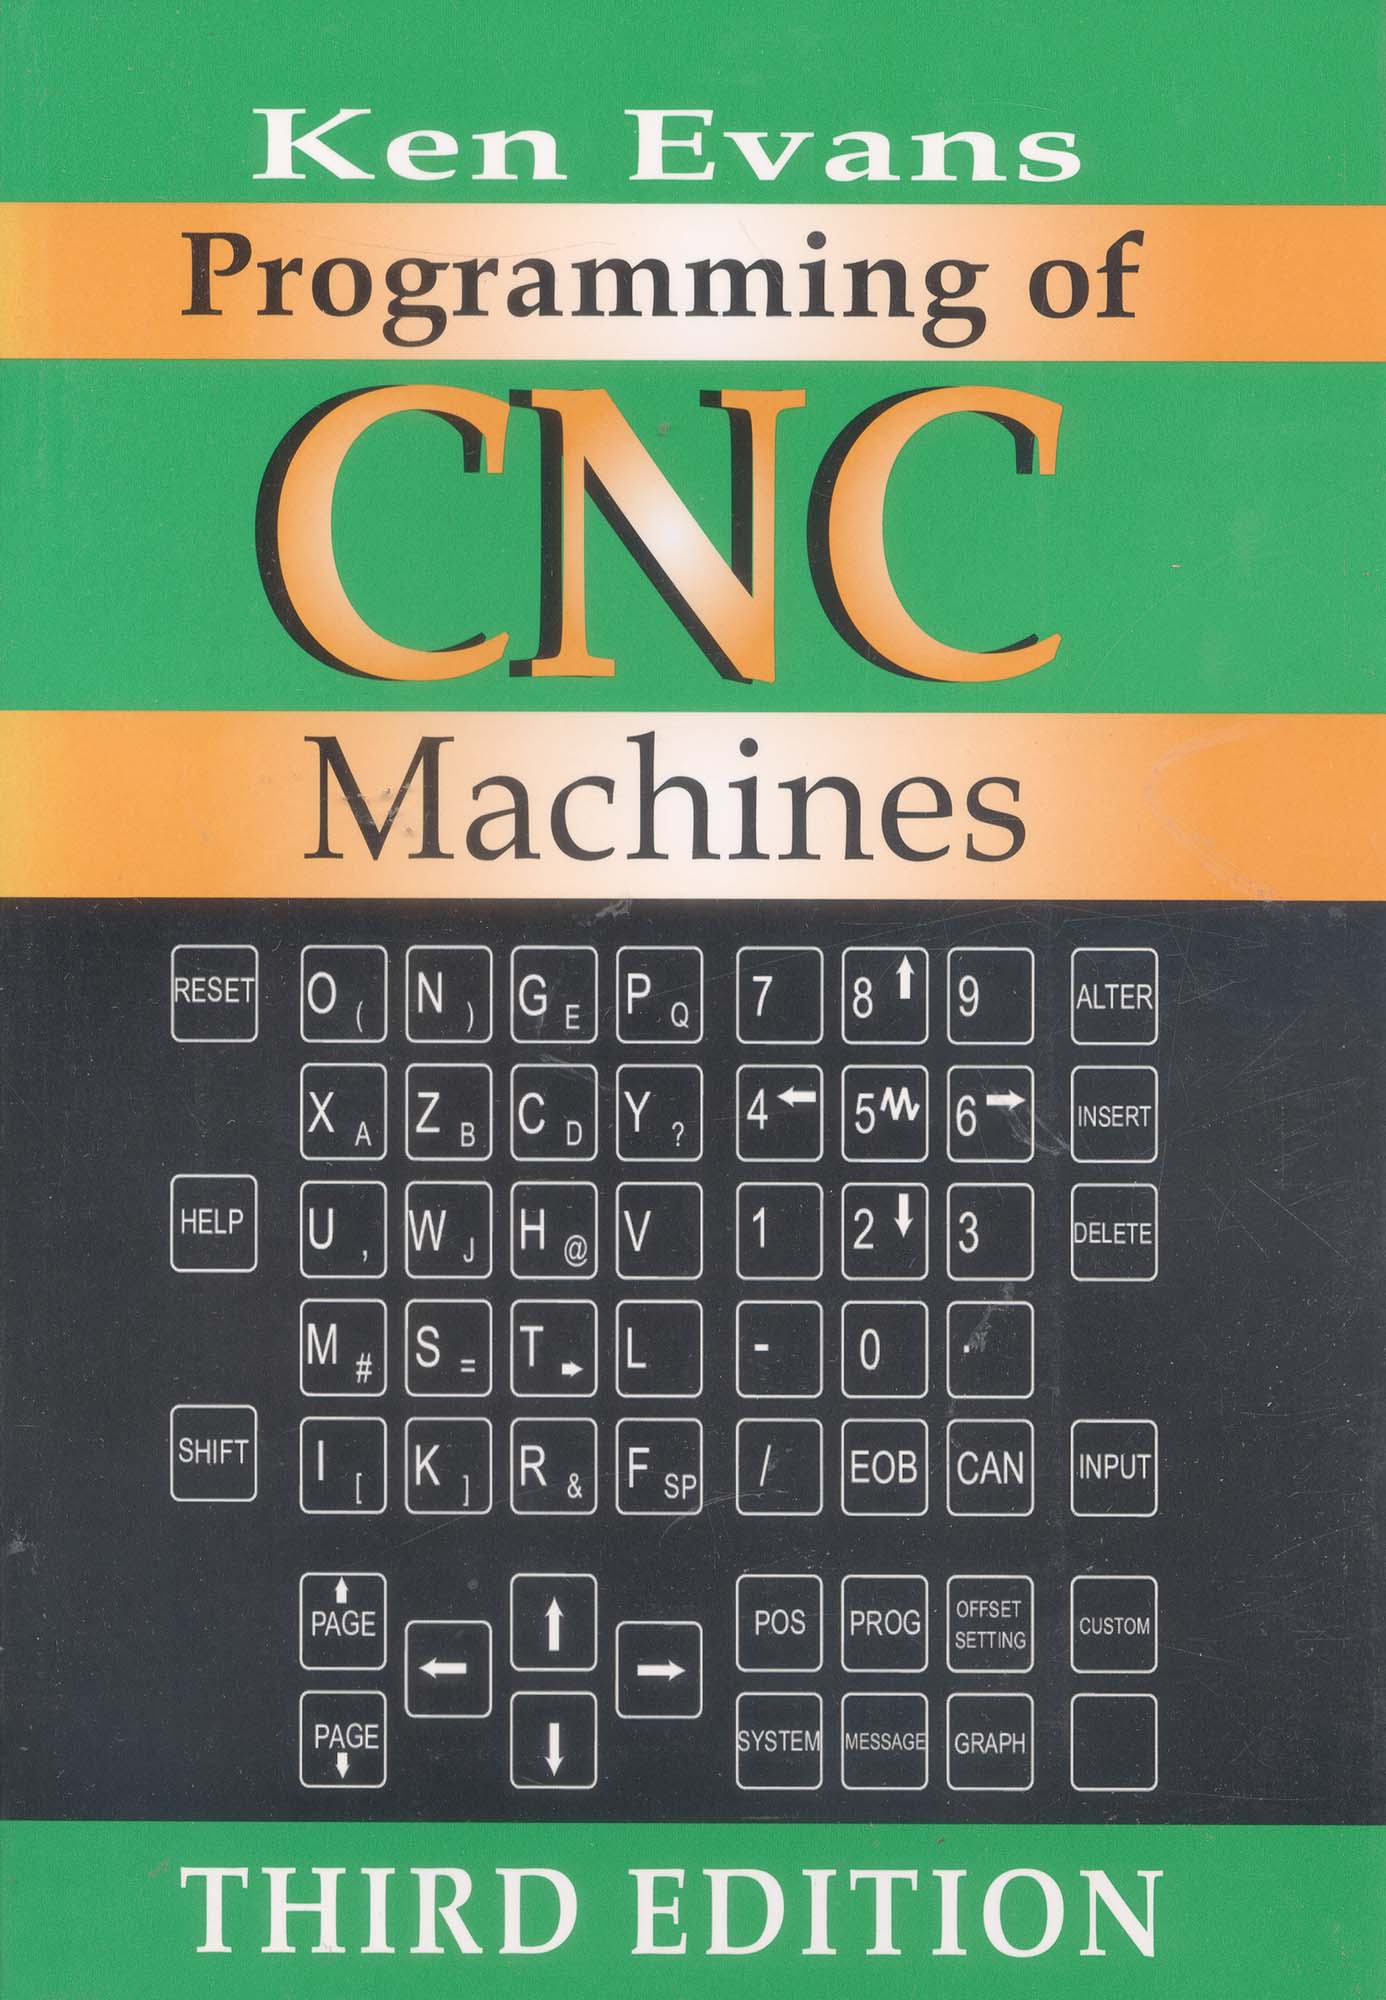 Book-Programming of CNC Machines, 3rd Edition